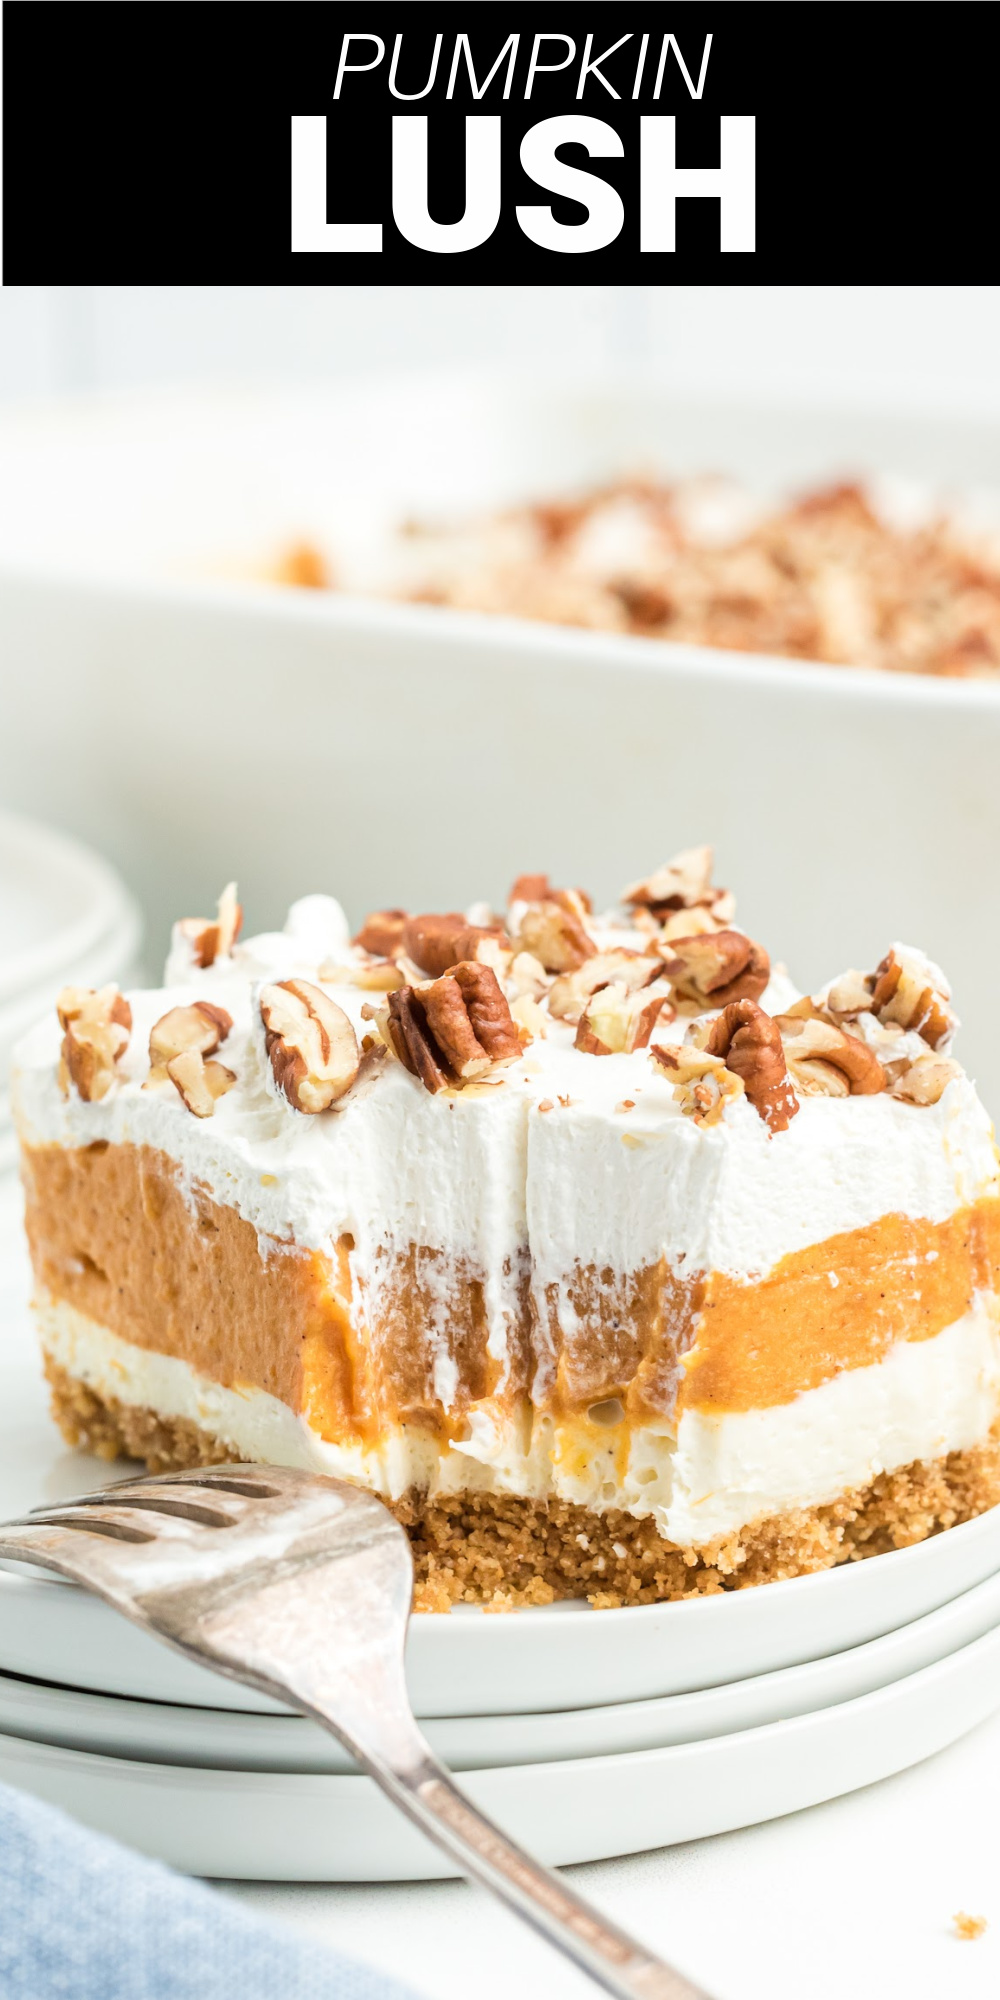 Pumpkin lush is an easy dessert with layers of cream cheese and whipped topping with a creamy pumpkin layer in between all on top of a homemade graham cracker crust.